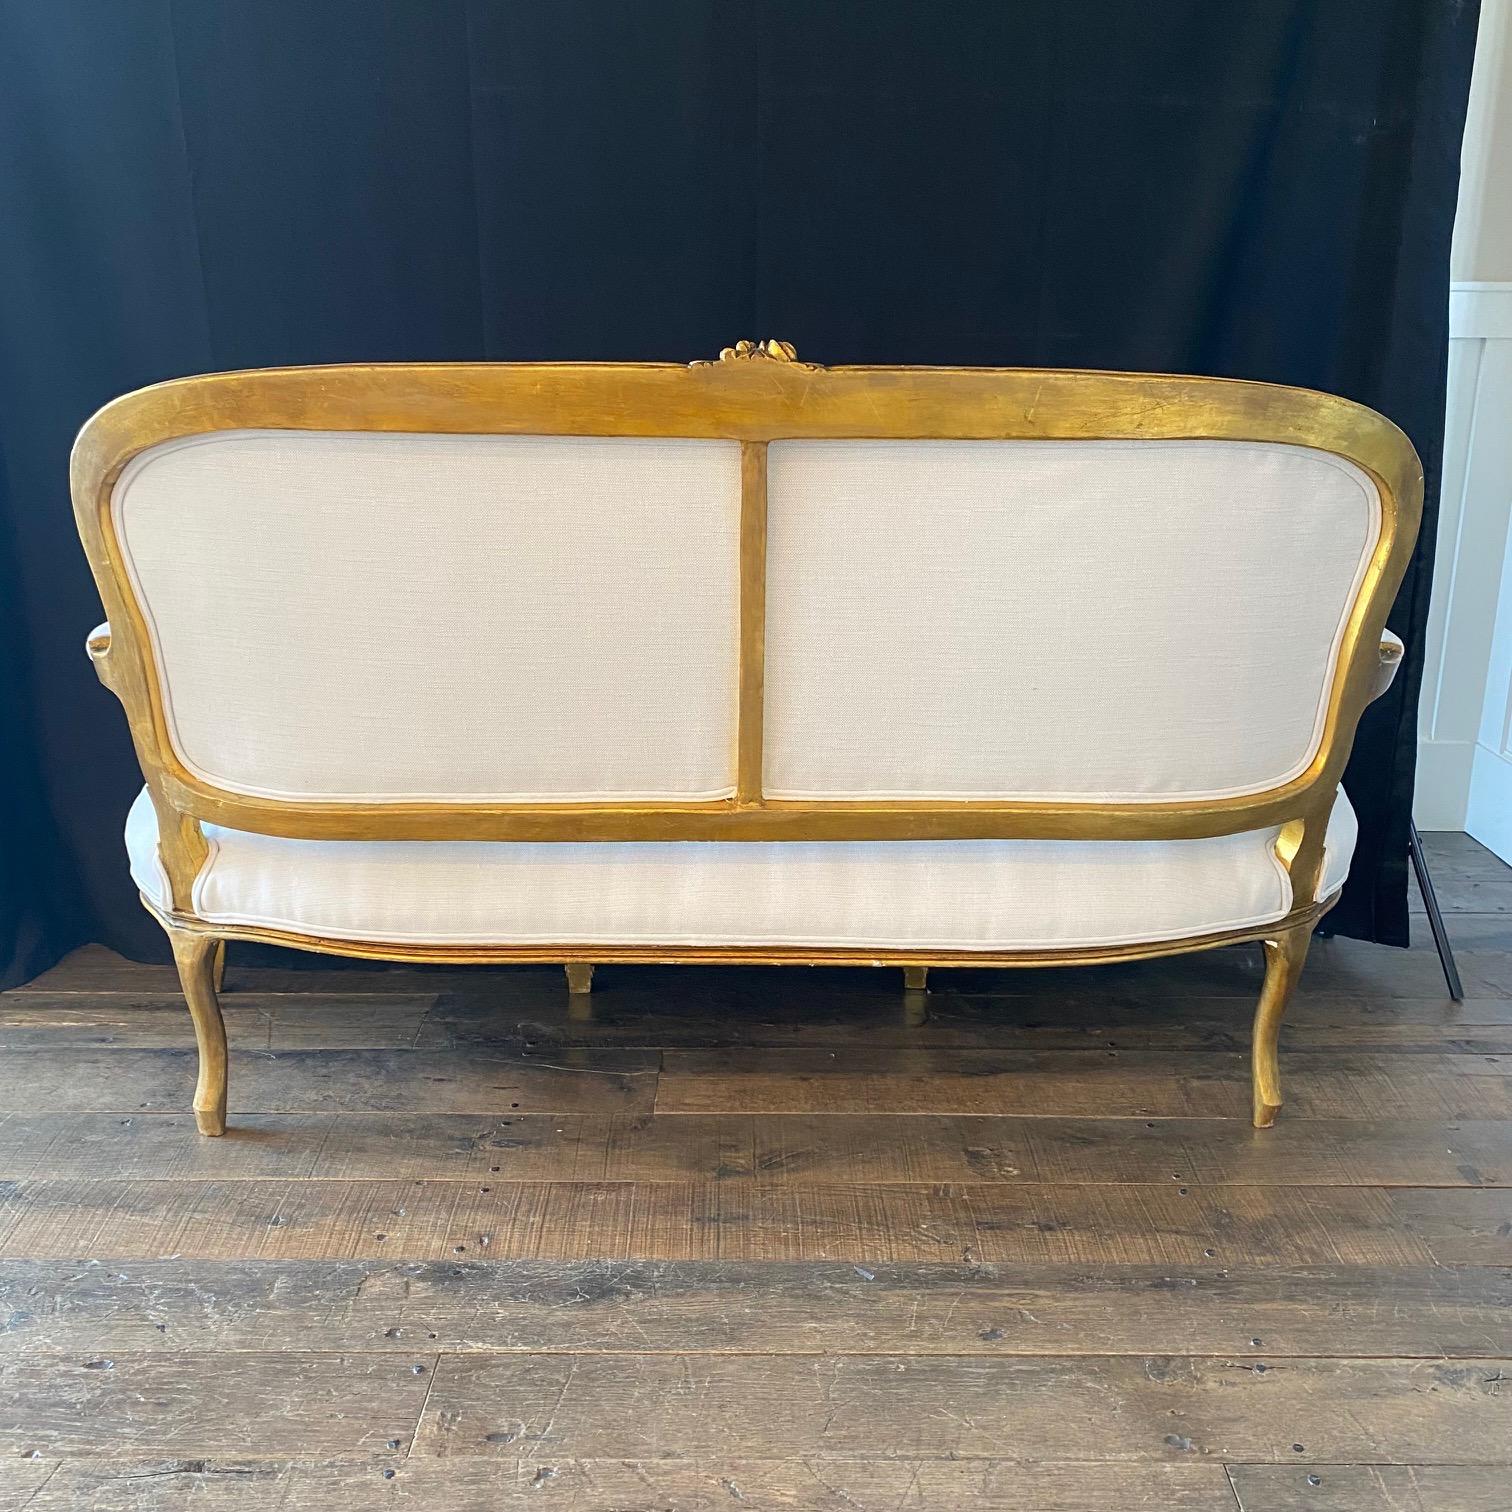 French Gold Giltwood Louis XV Sofa, Loveseat or Settee Newly Reupholstered  2